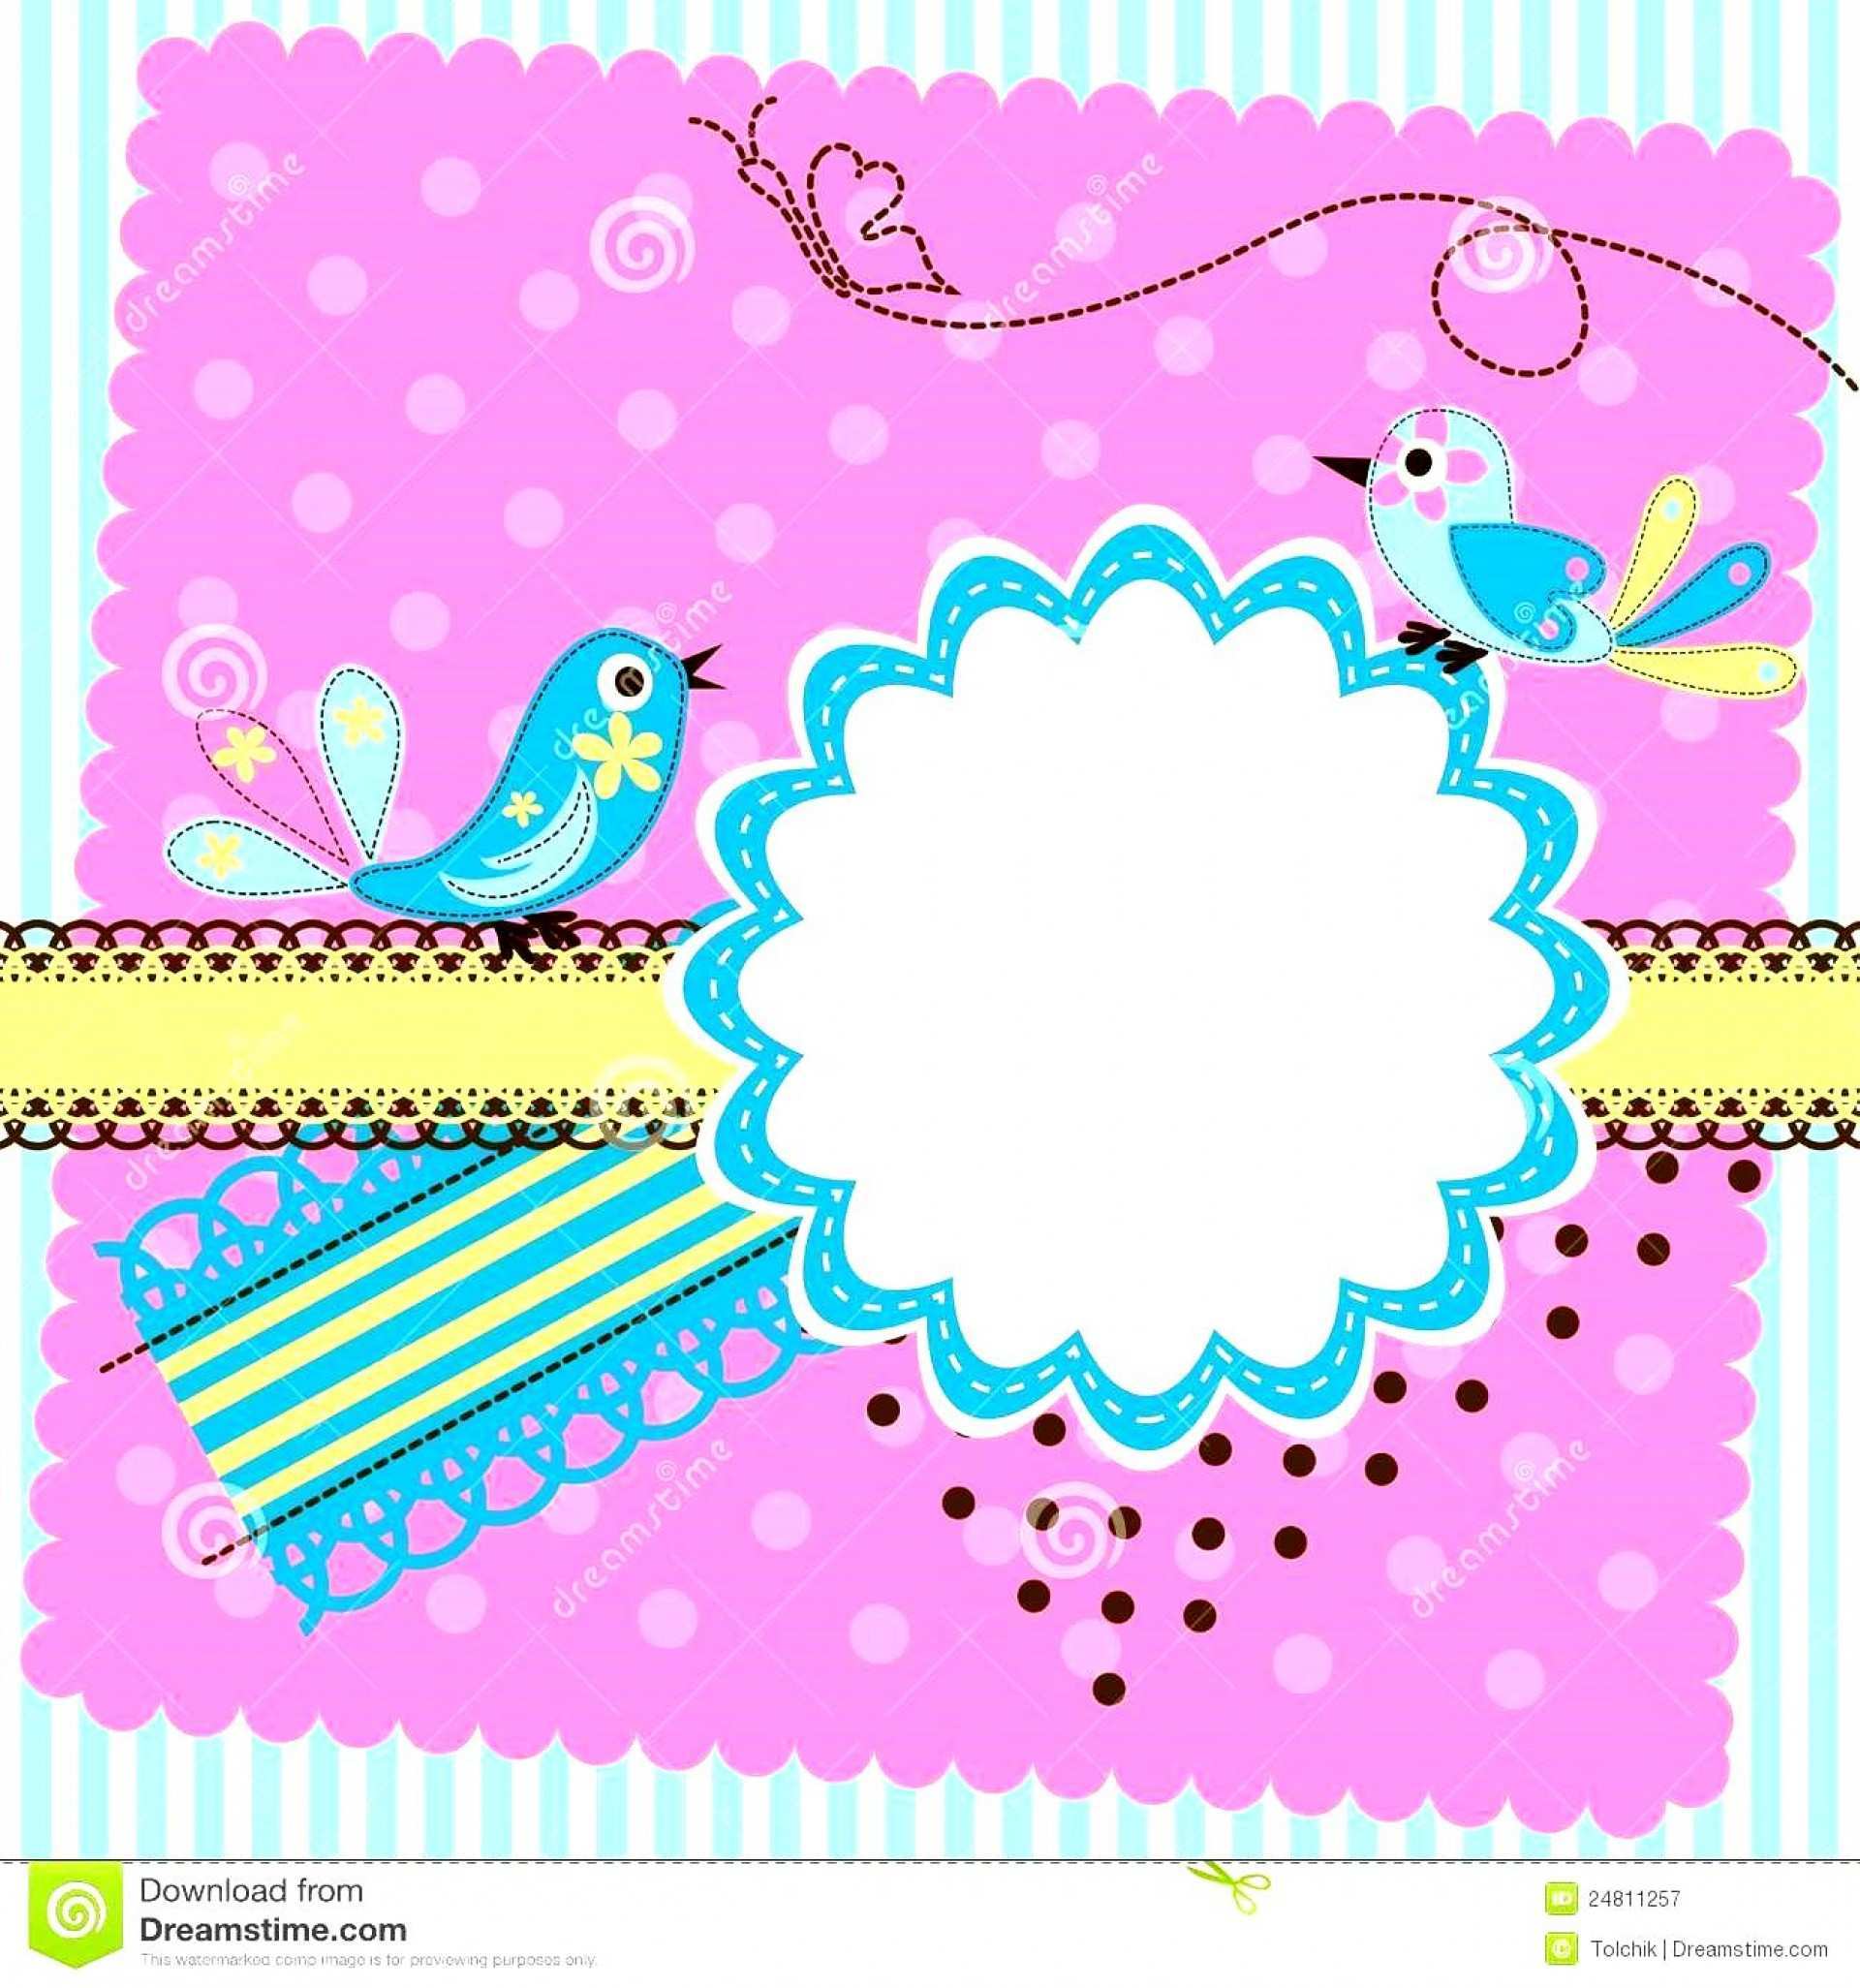 greeting-card-template-word-free-download-cards-design-templates